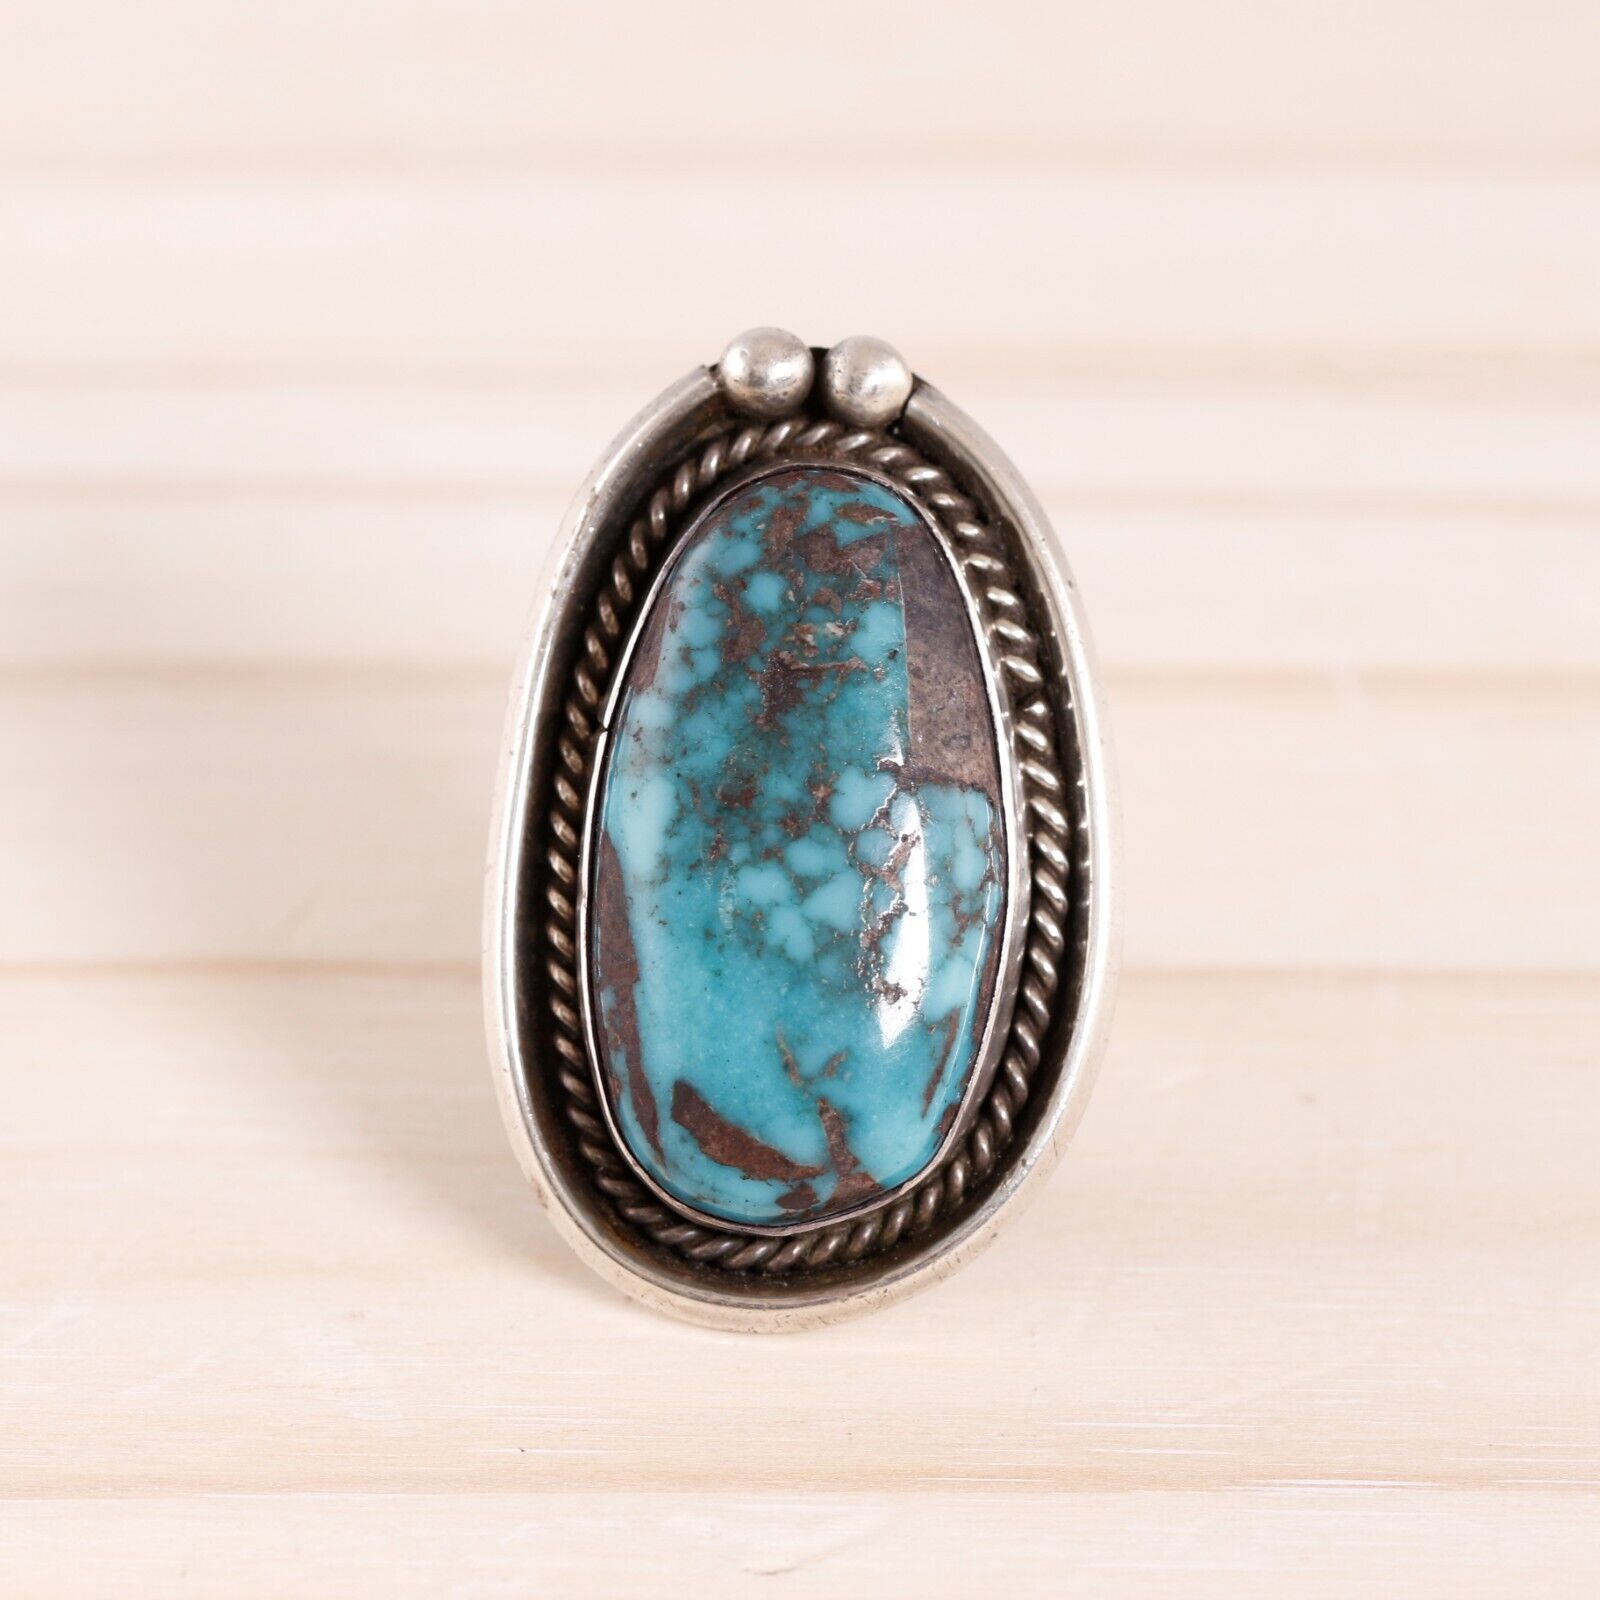 OLD PAWN STERLING SILVER BLUE TURQUOISE ROPE BORDER RAIN DROPS RING 5.5